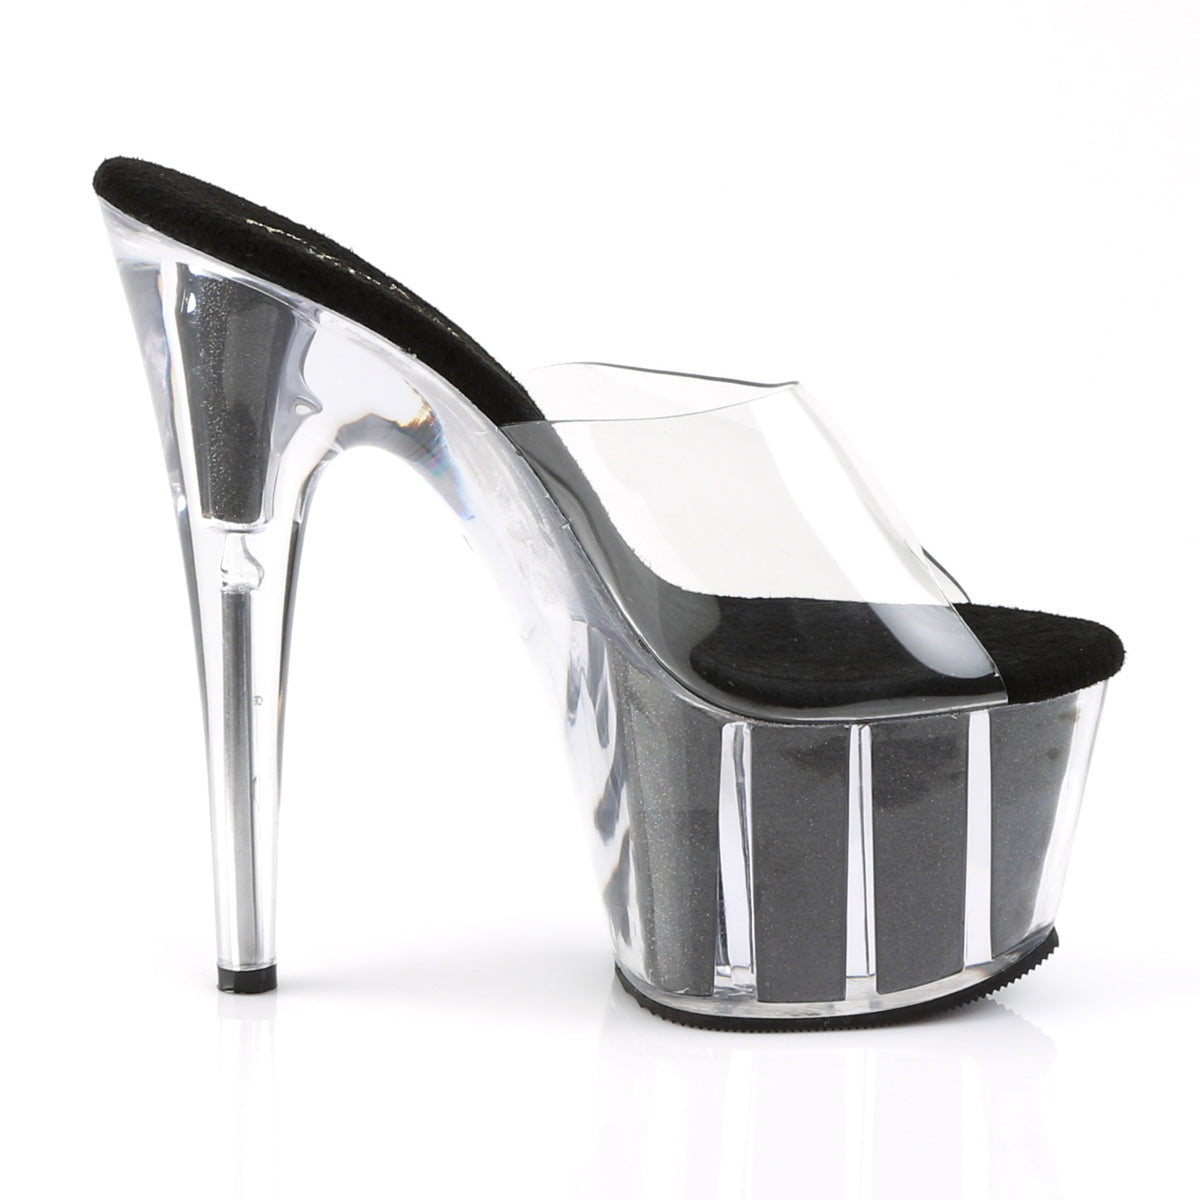 ADORE-701G 7" Heel Clear and Black Glitter Pole Dancer Shoes-Pleaser- Sexy Shoes Fetish Heels